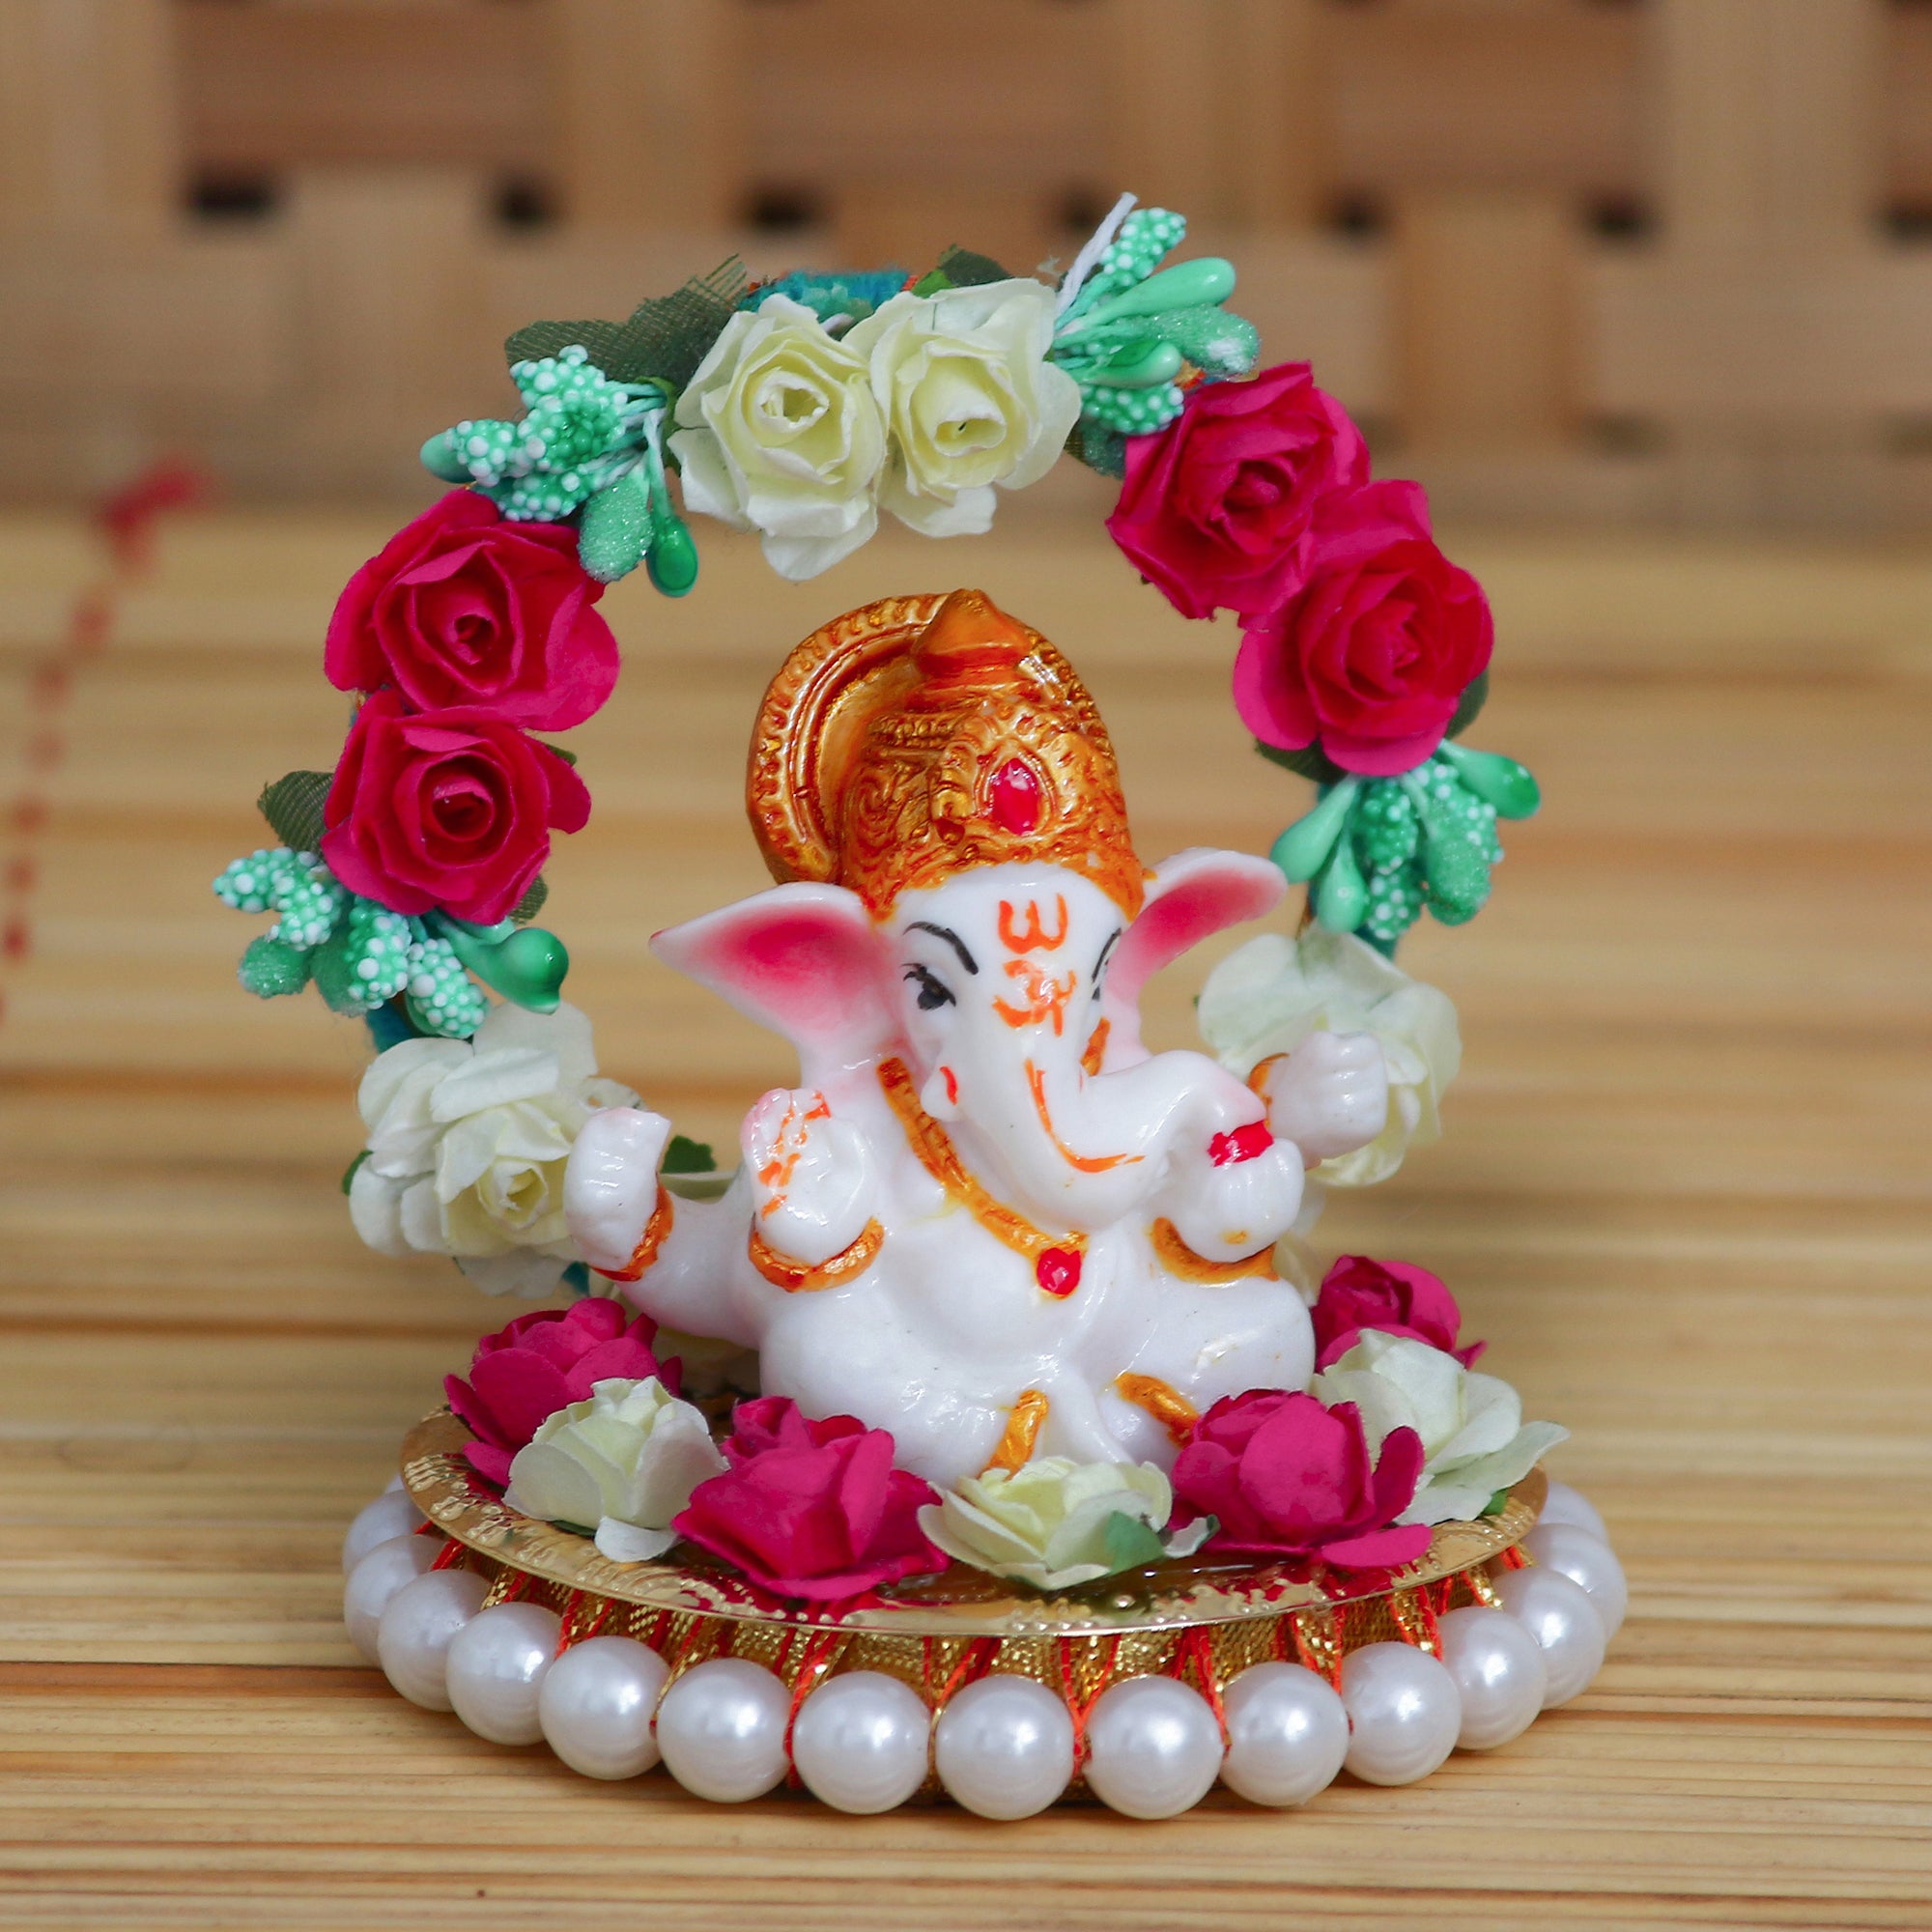 Polyresin Lord Ganesha Idol on Decorative Handcrafted Plate with Throne of Colorful Flowers 1